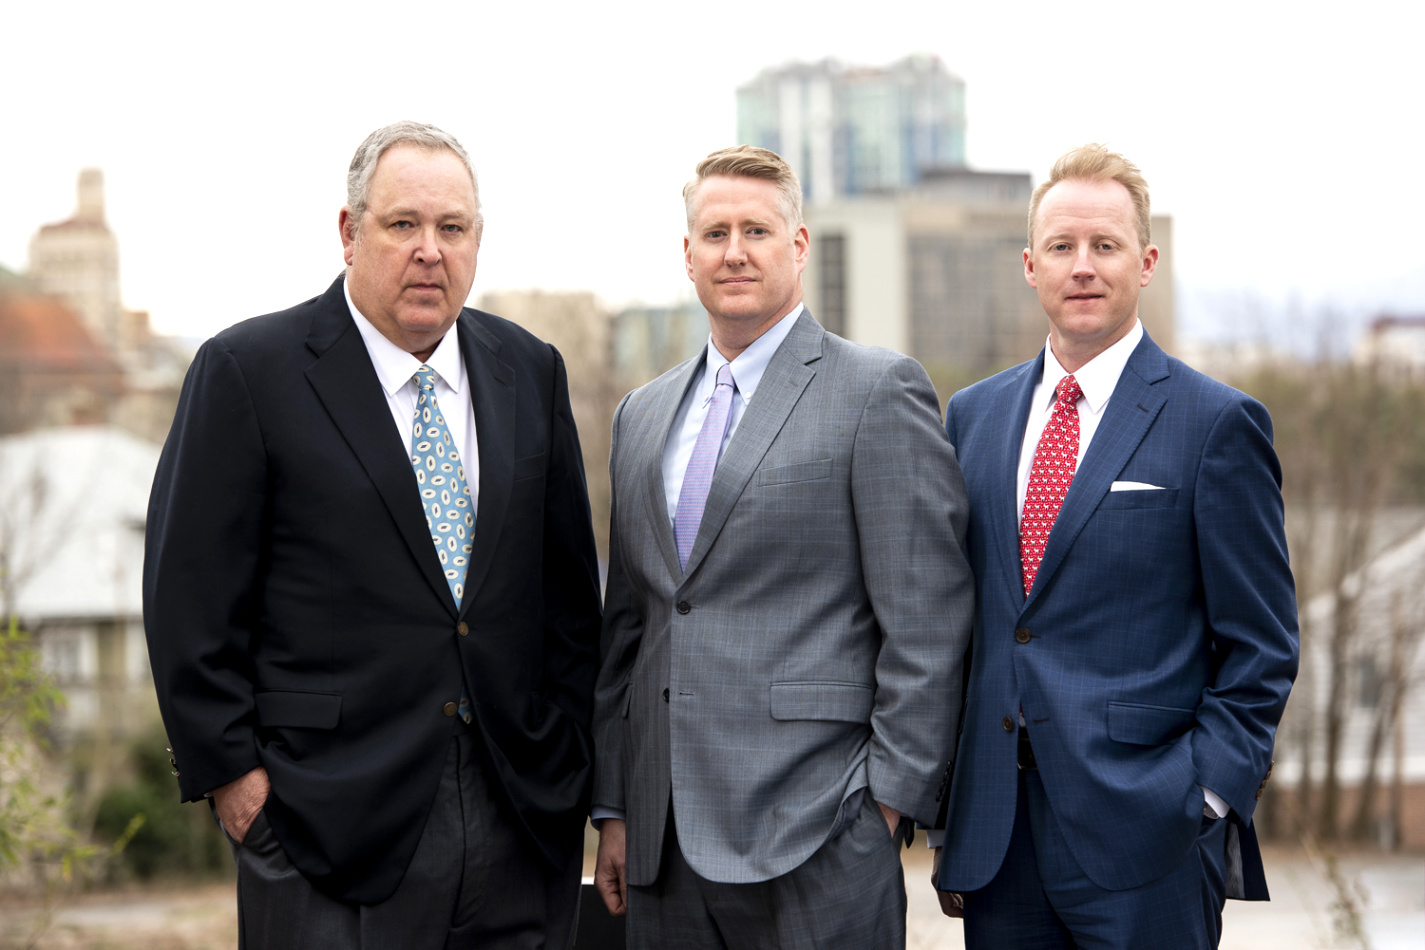 Personil Injury Lawyer In Buncombe Nc Dans Chad Ray Donnahoo and Reed Williams Join Brian Elston Law